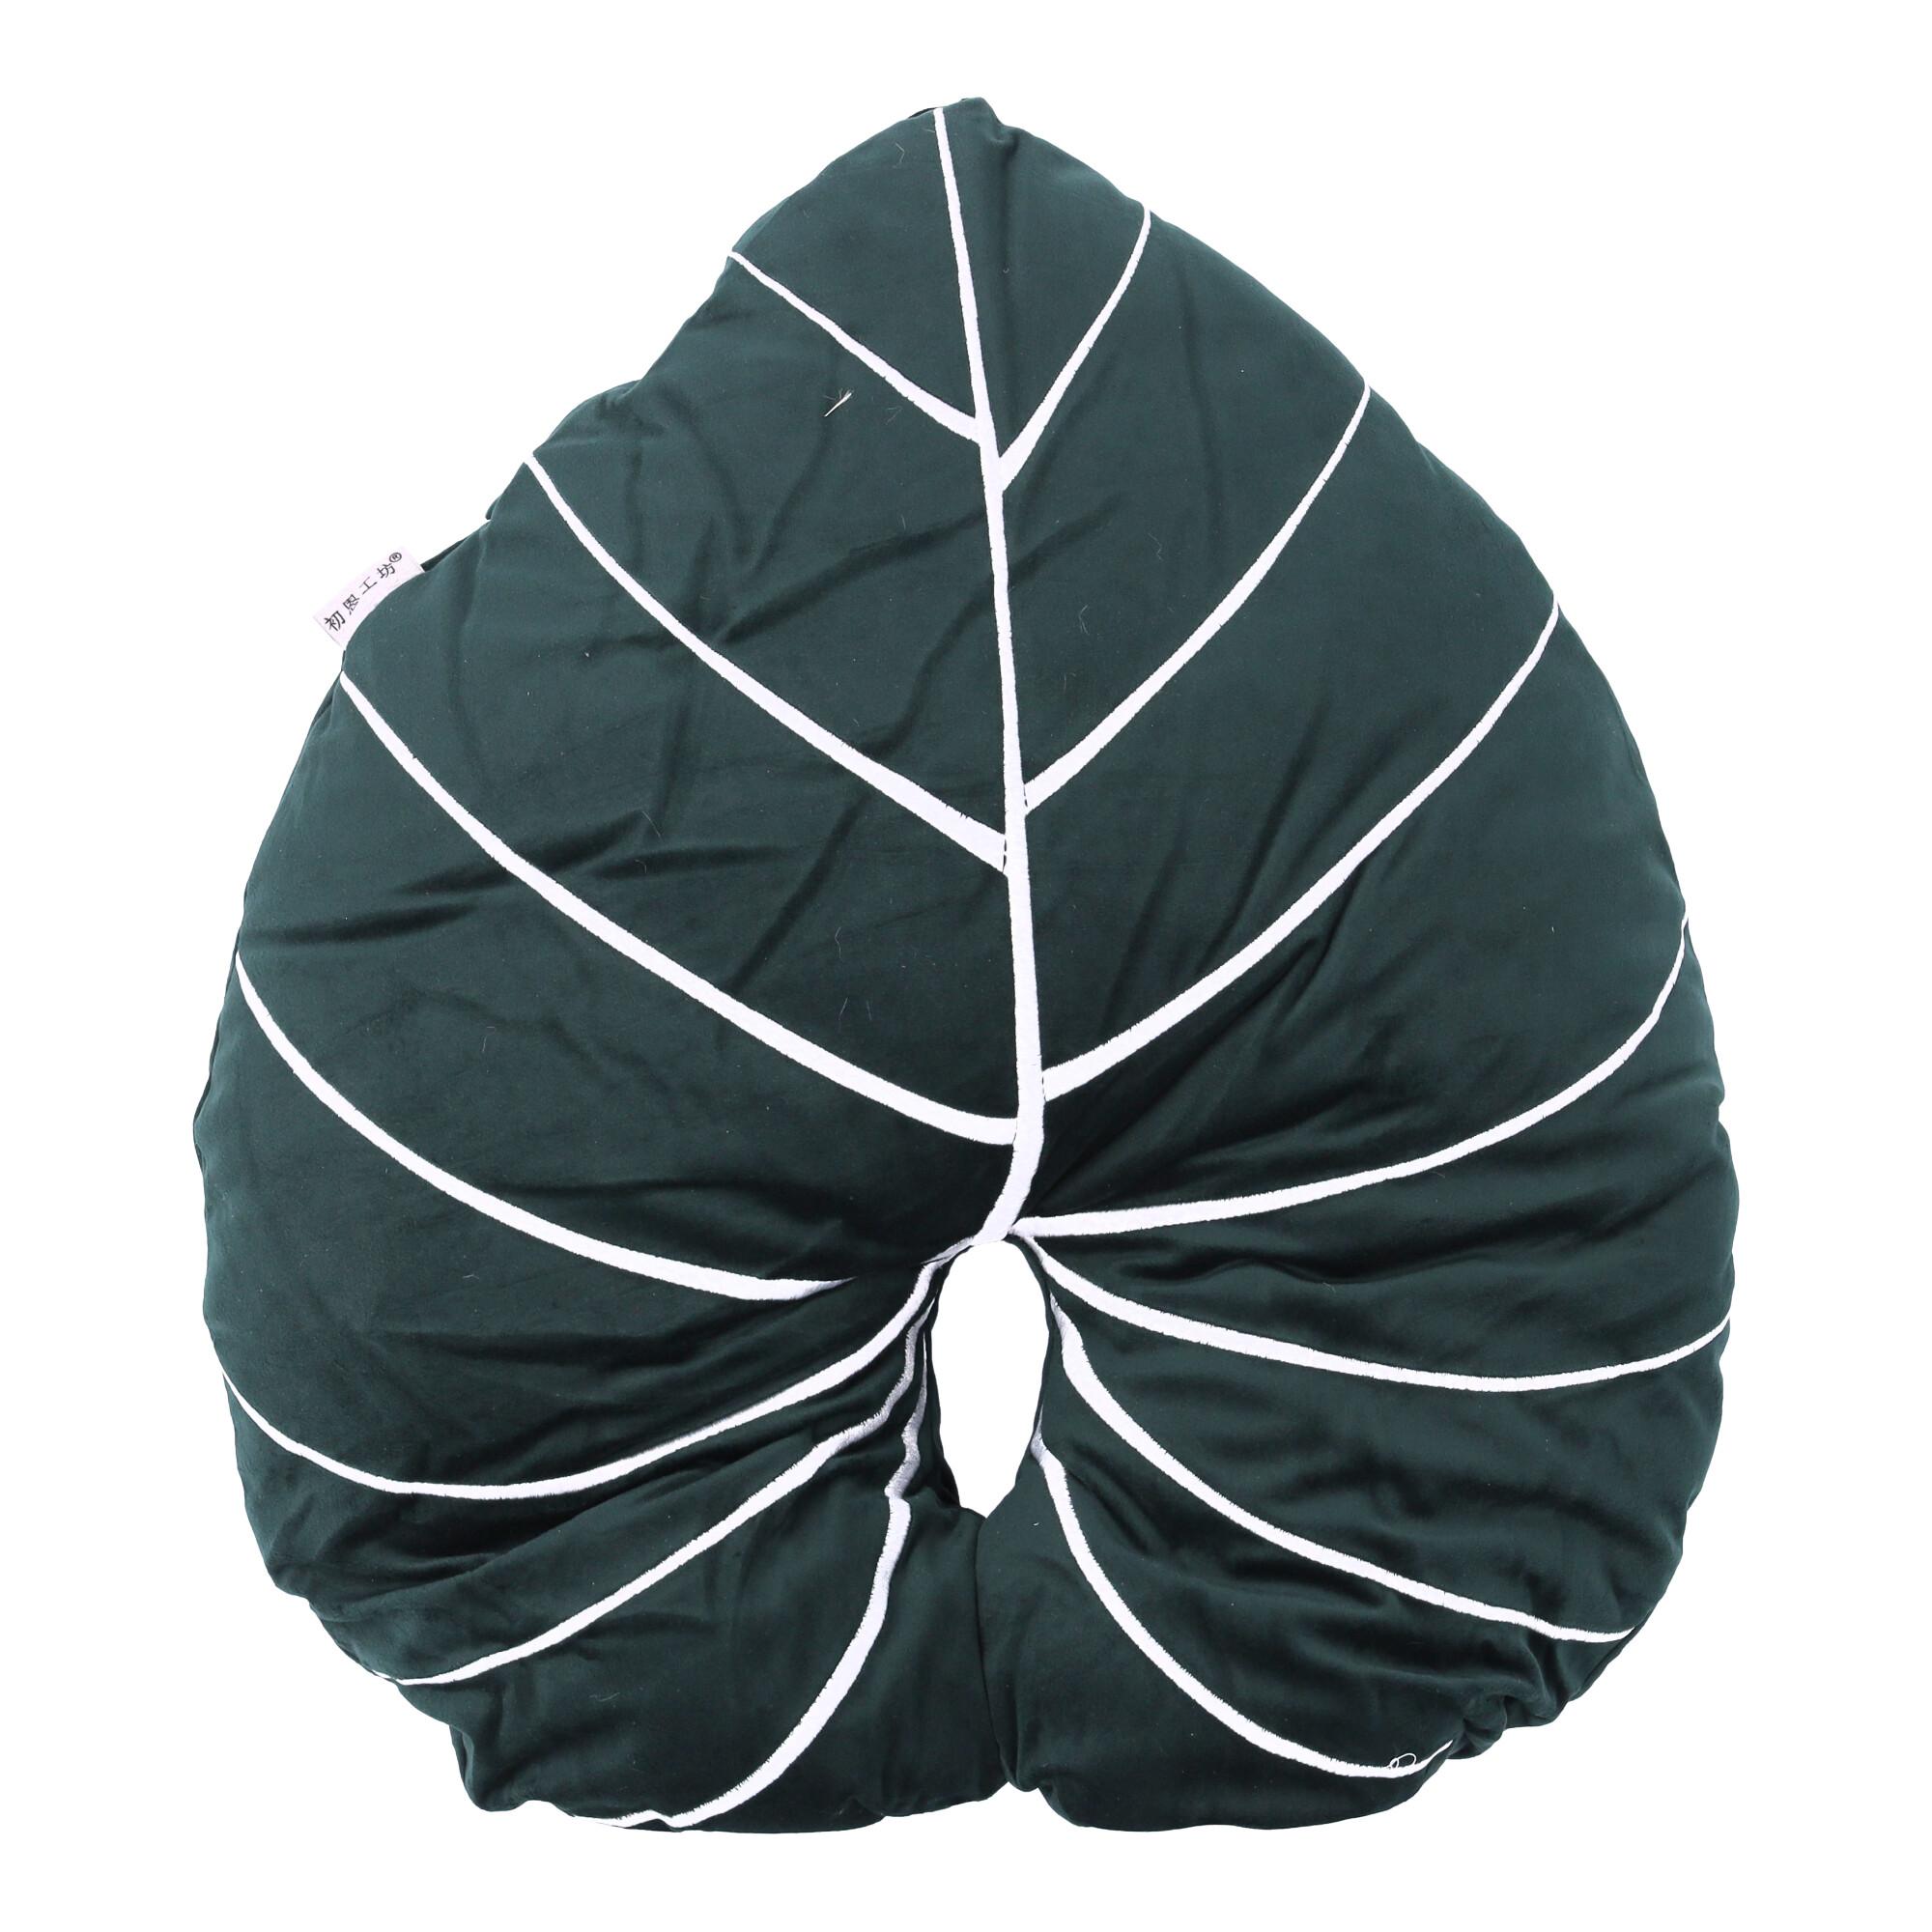 Decorative plush cushion in the shape of a leaf - type 4